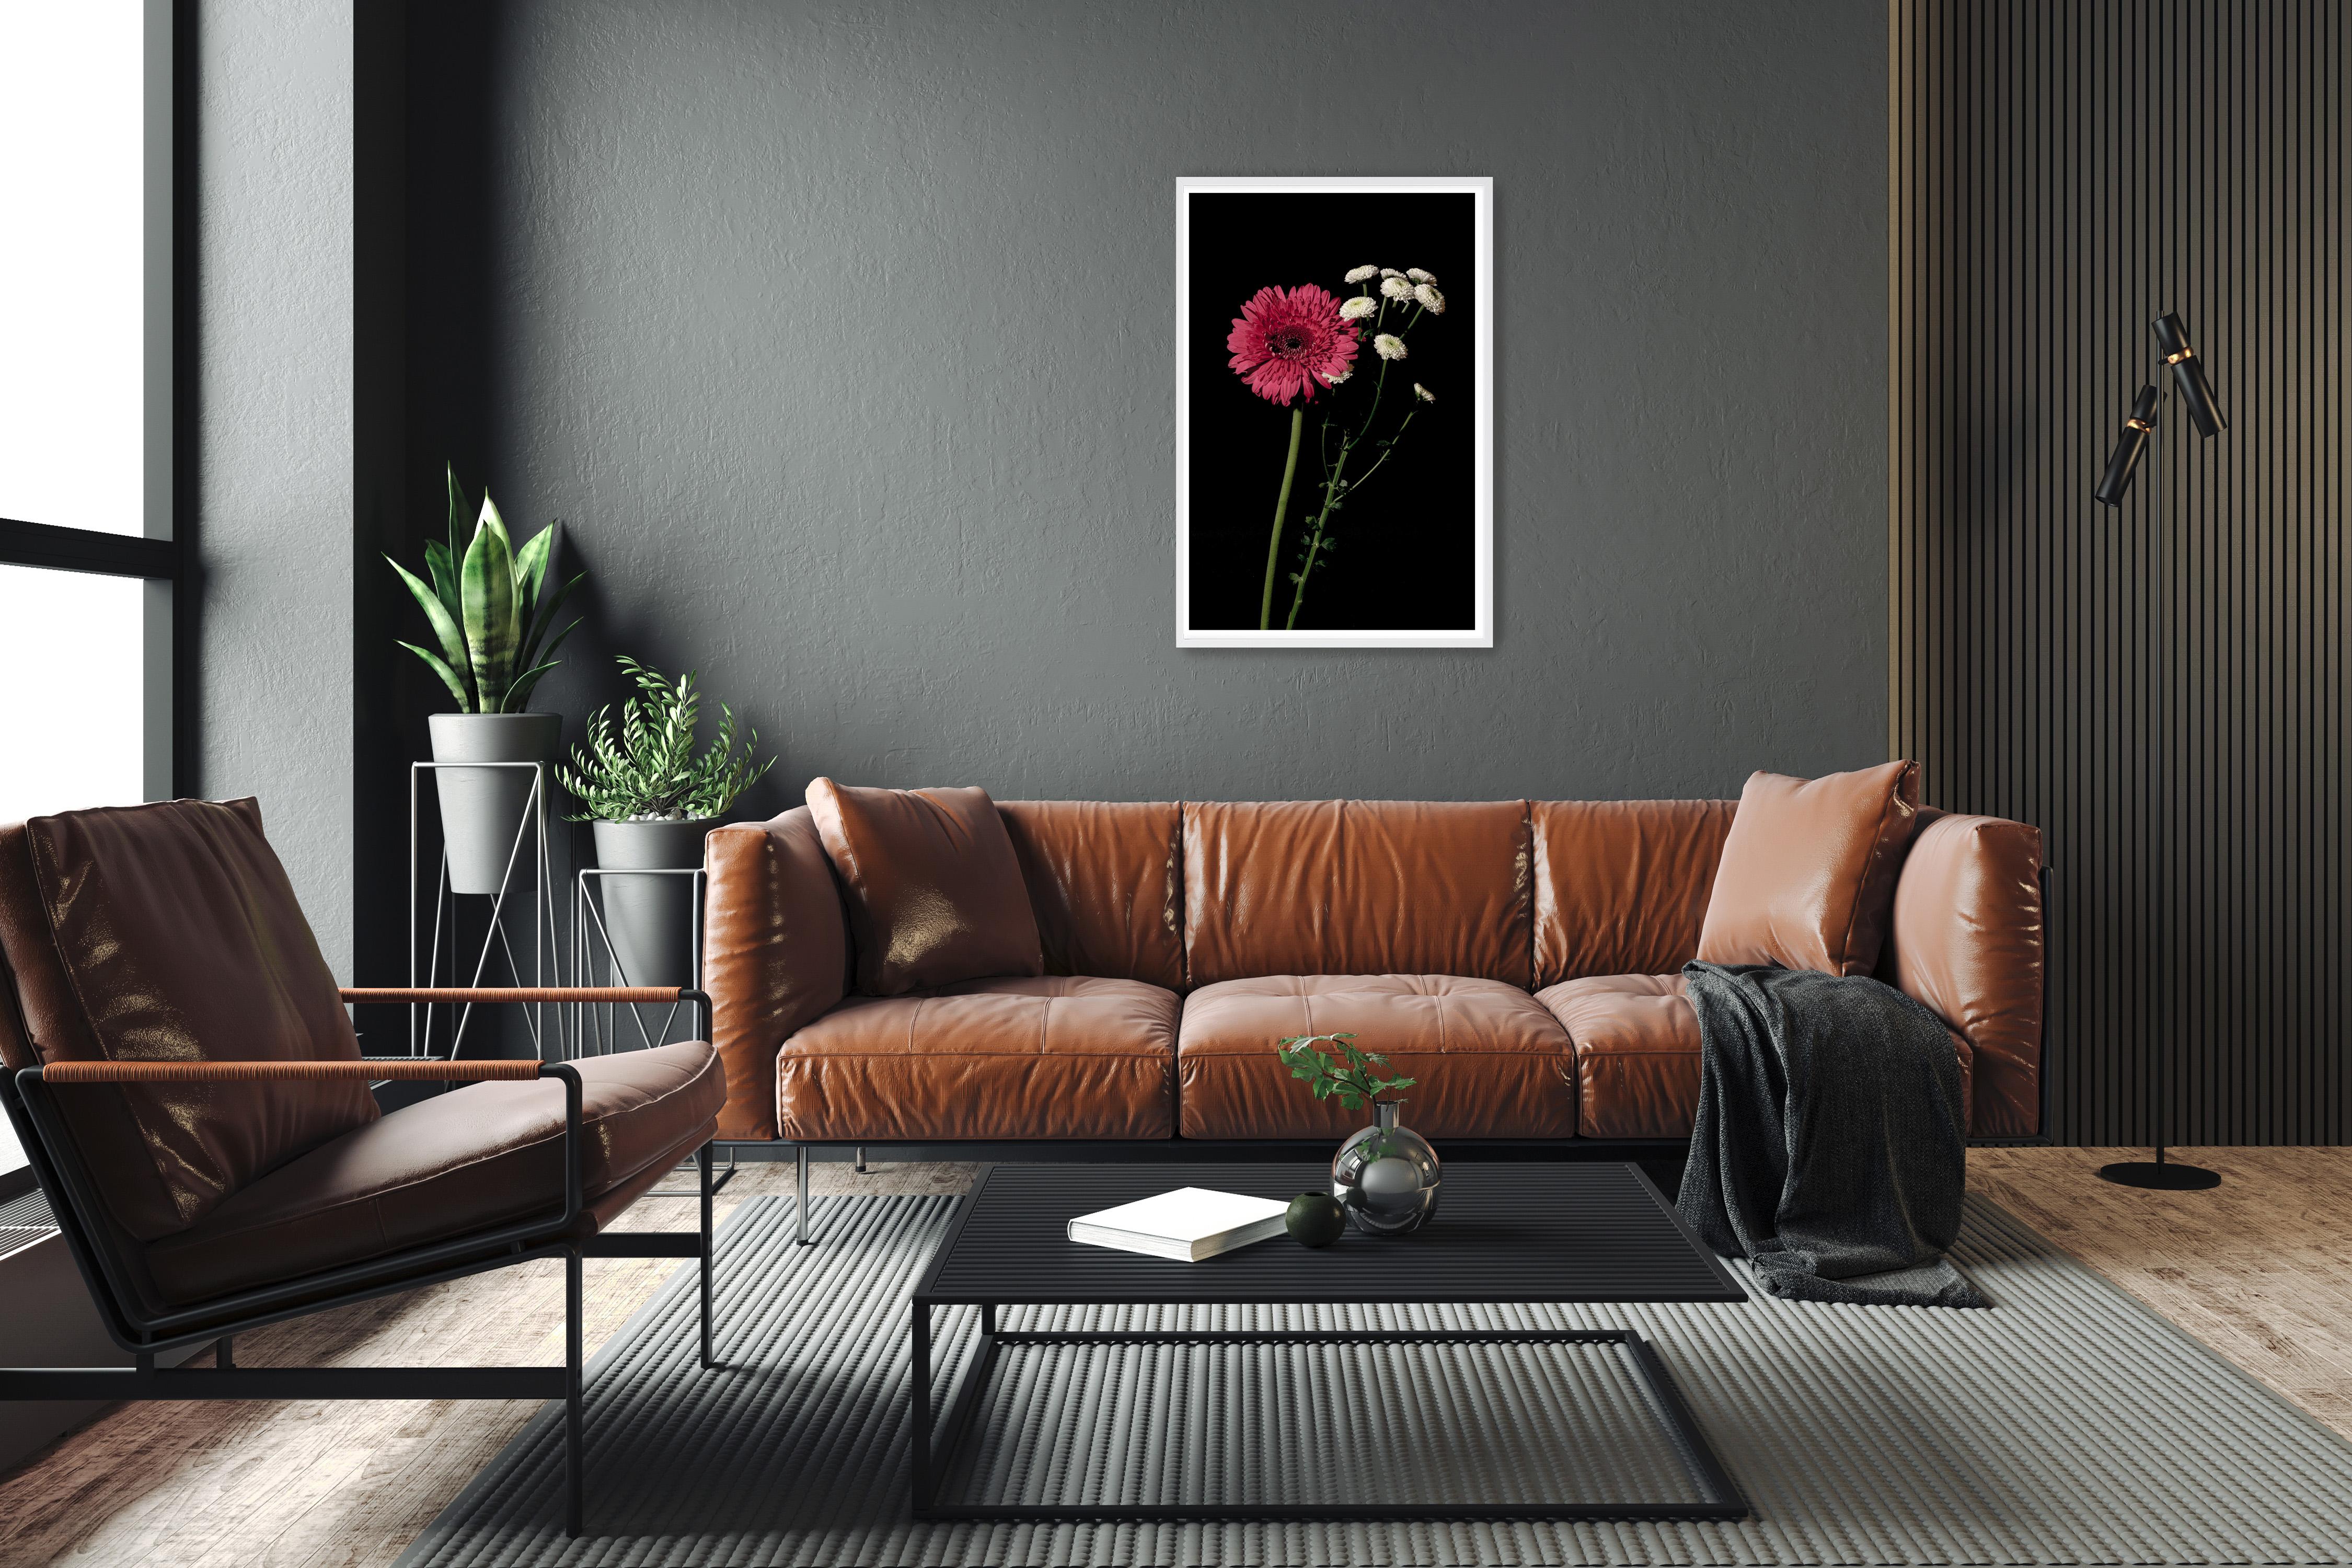 Pink and White Delicate Flowers, Black Background, Bright Elegant Giclée Print For Sale 3